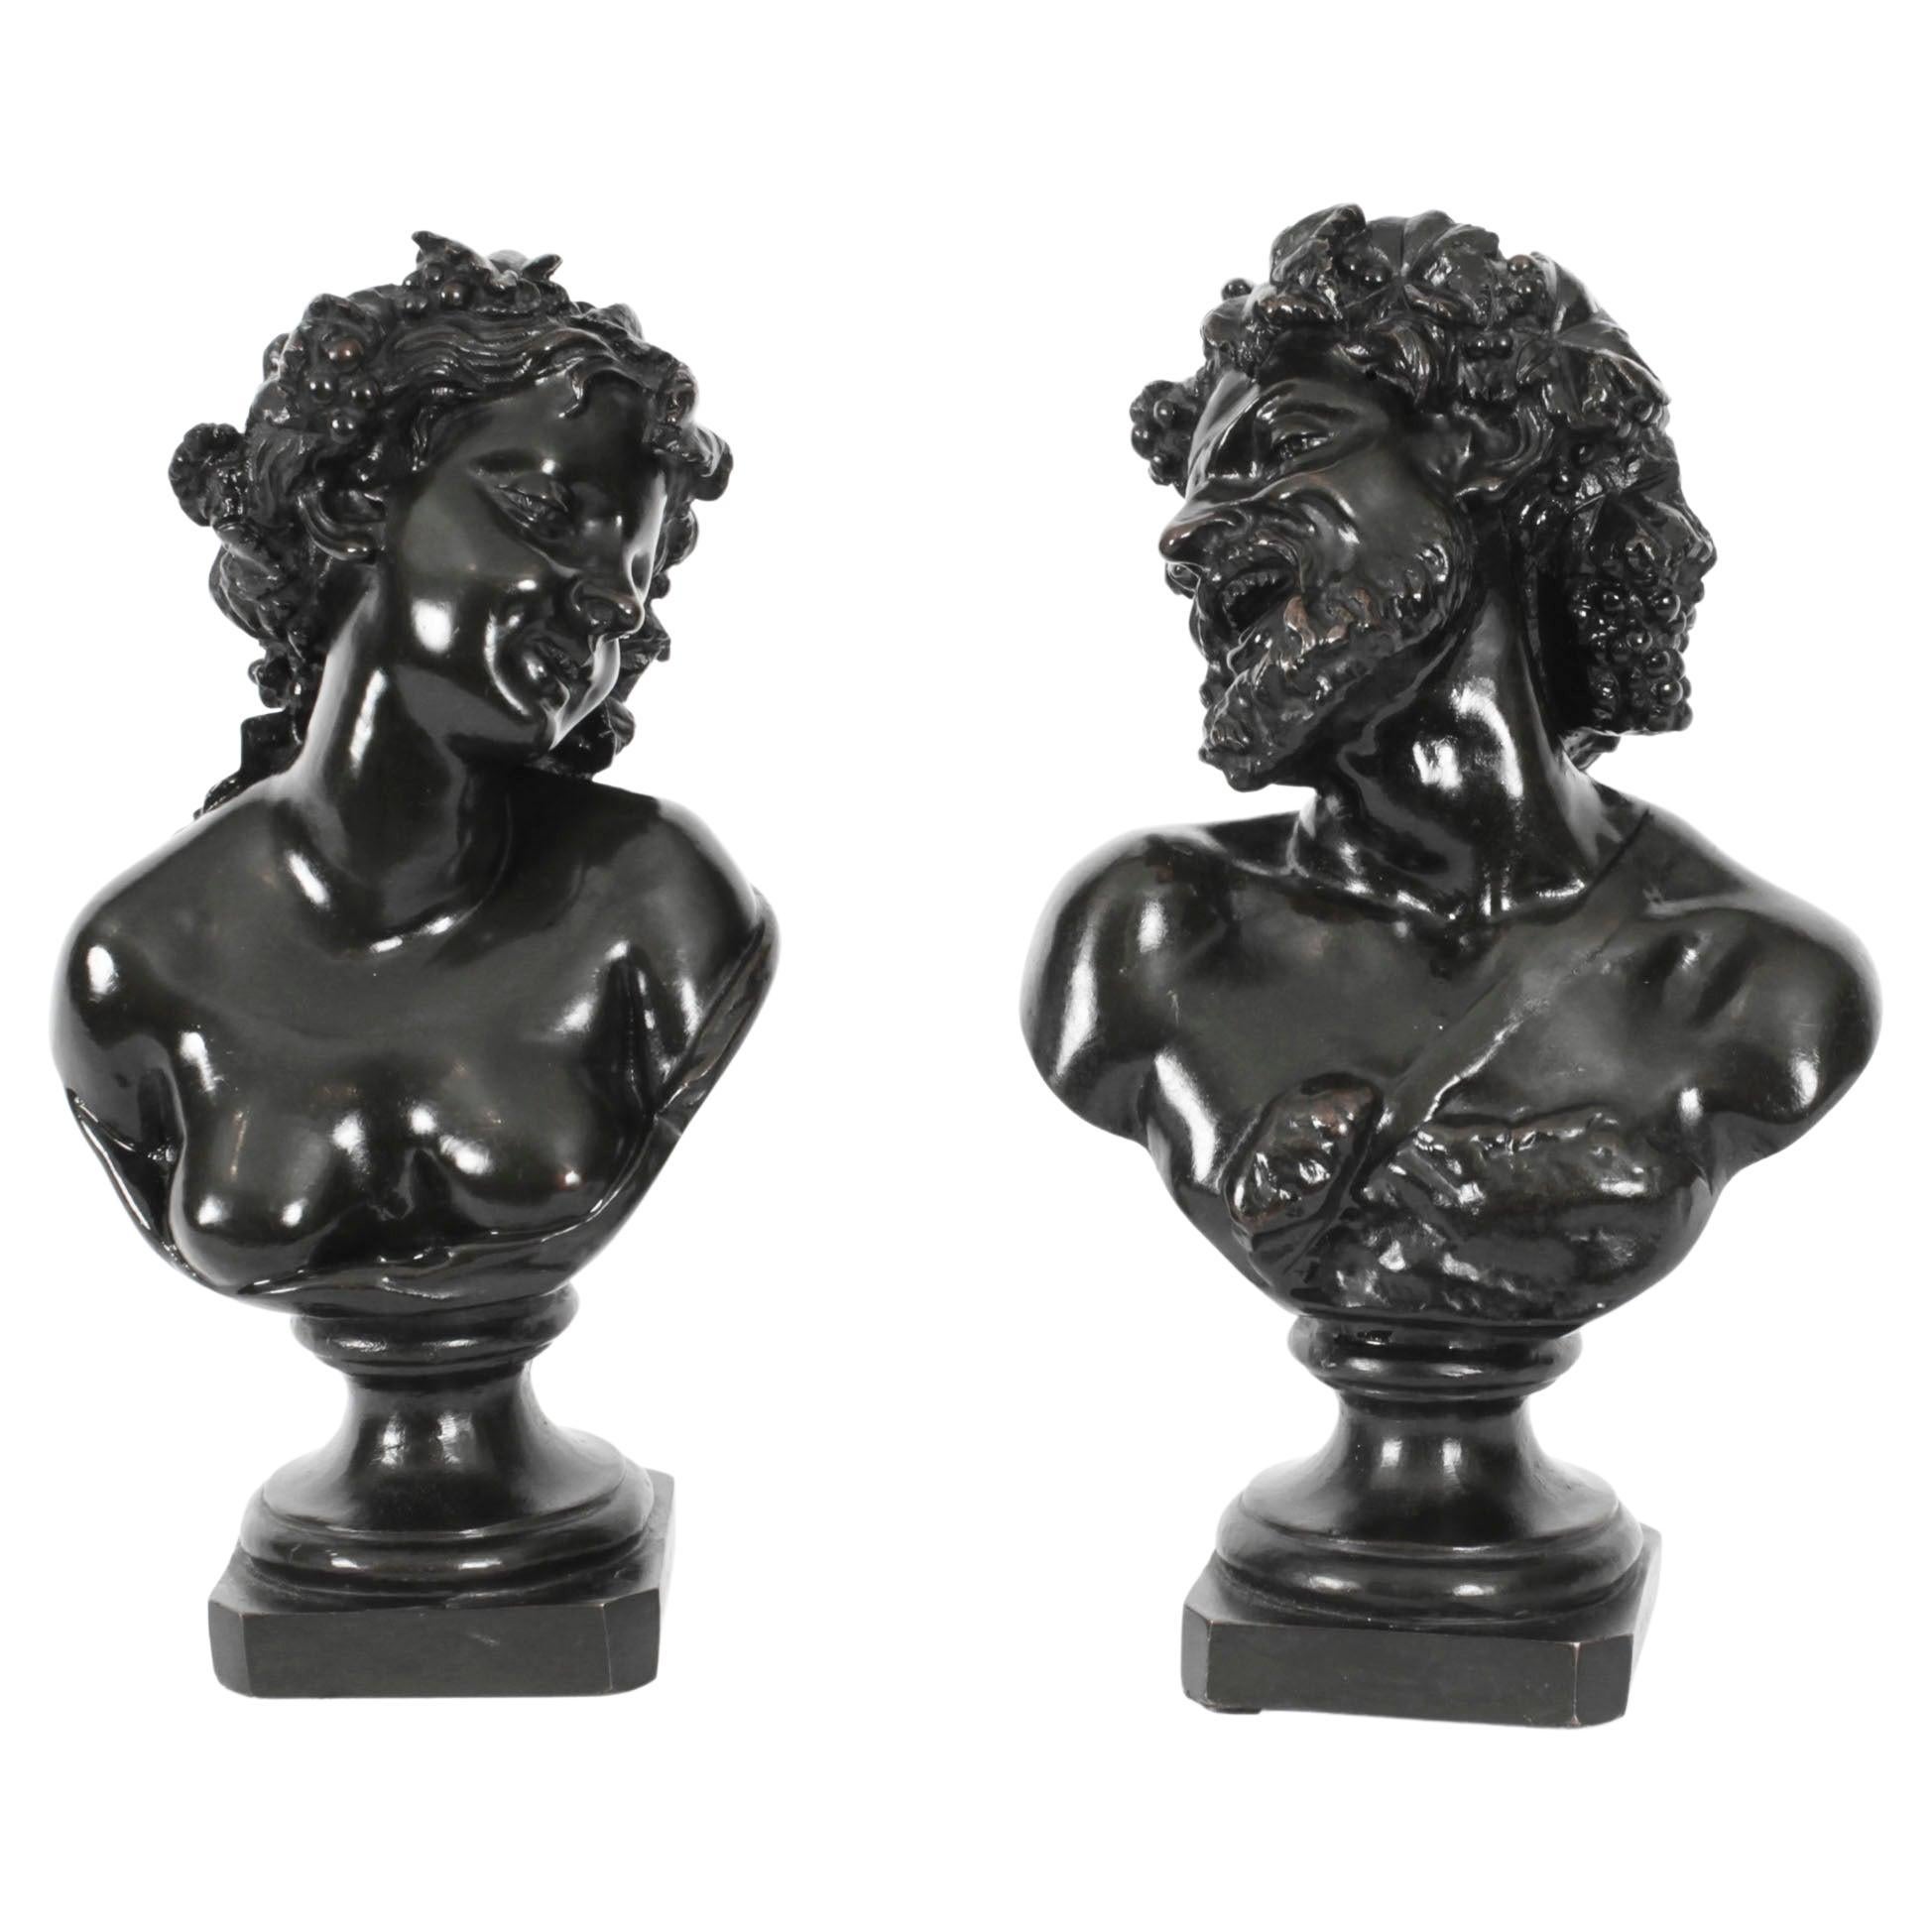 Antique Pair Italian Bronze Busts Dionysus and Ariadne by Clodion 18th Century